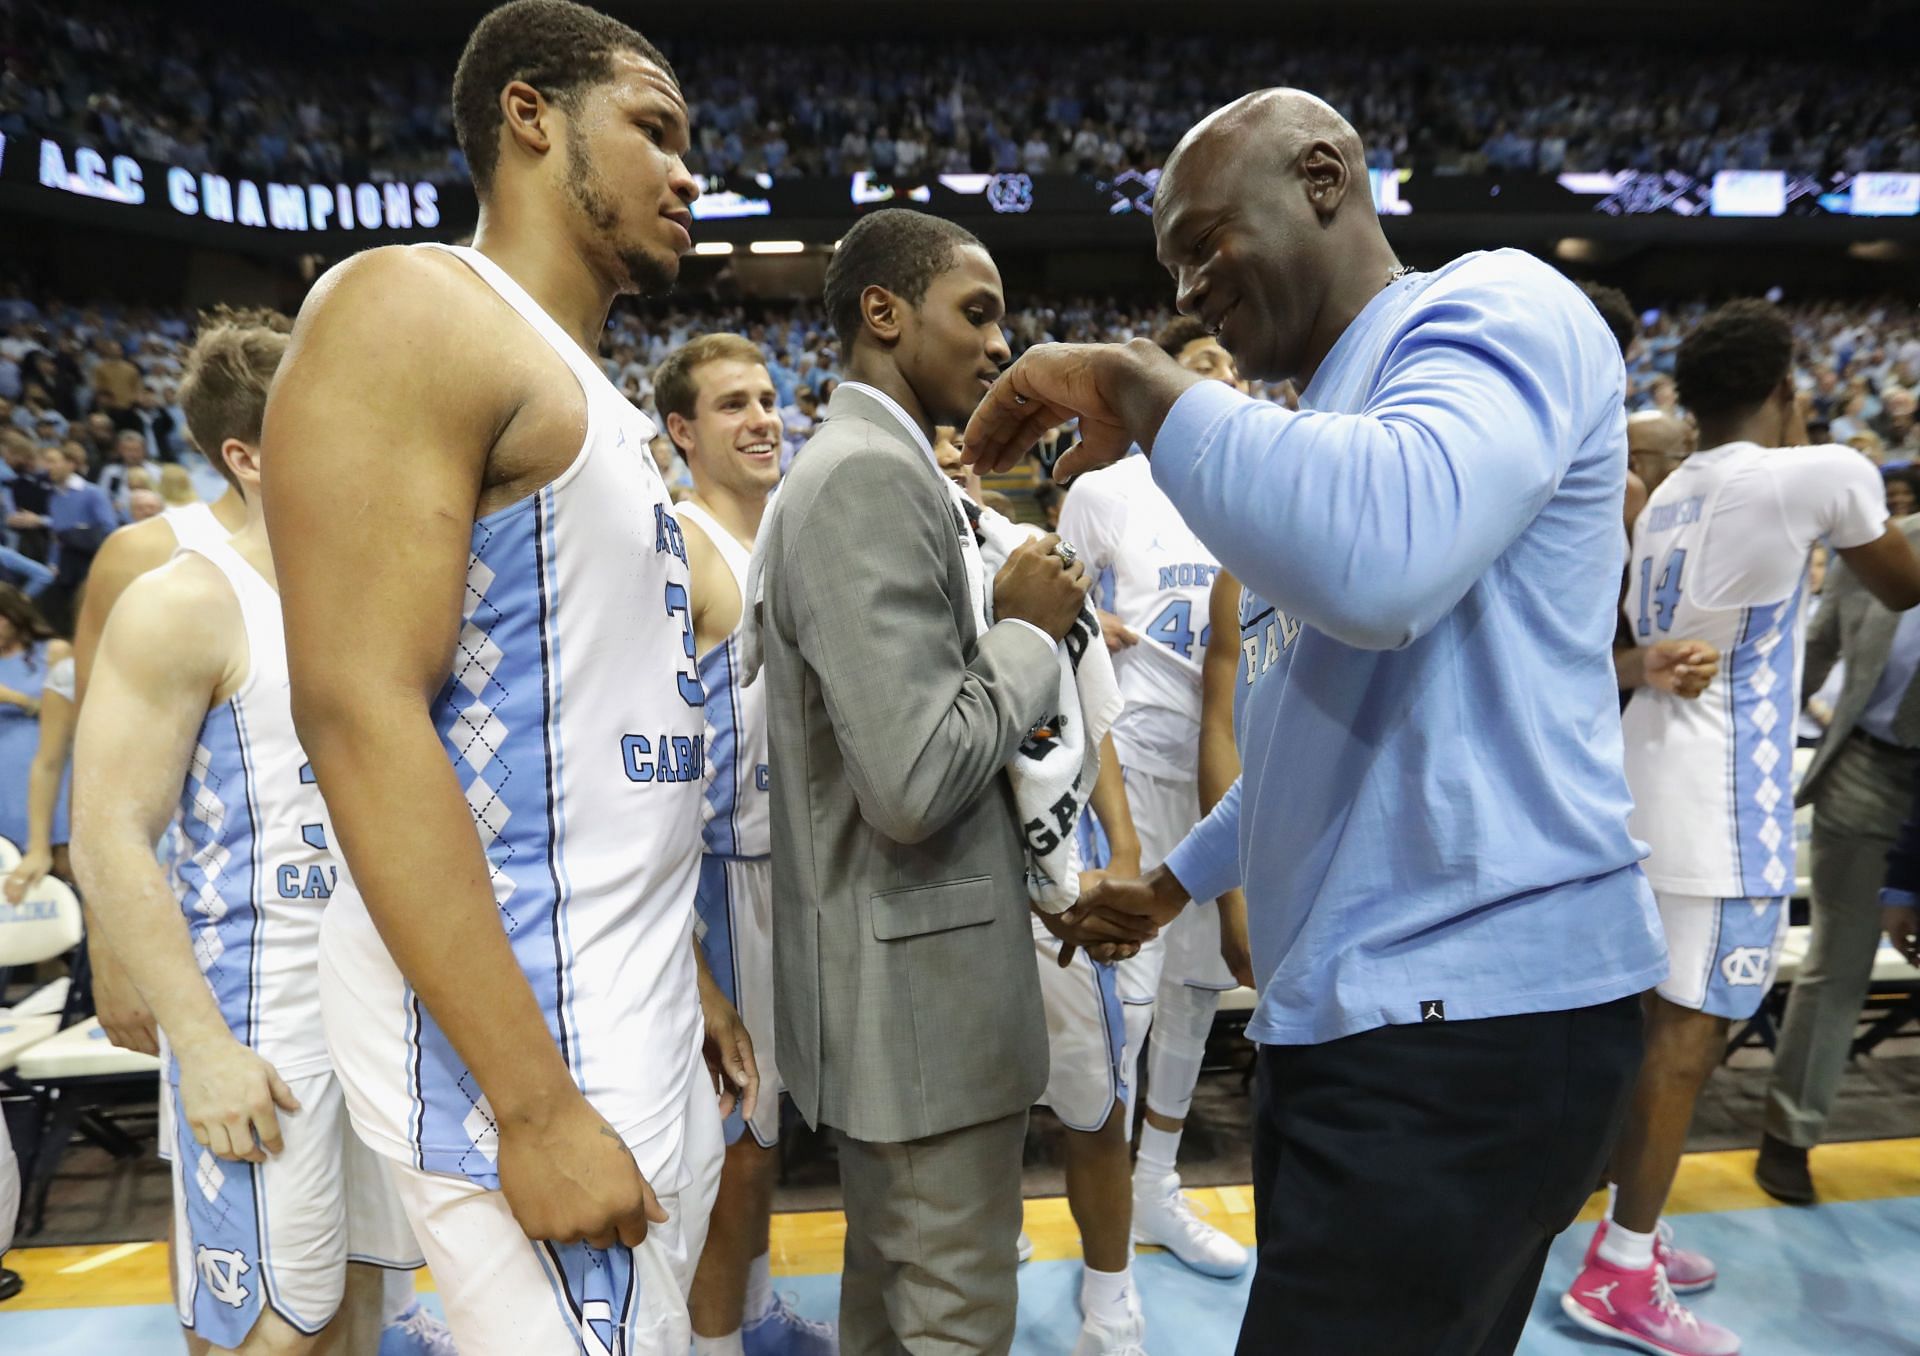 Michael Jordan is known as legendary, but many of his quotes come from former UNC coach Dean Smith.